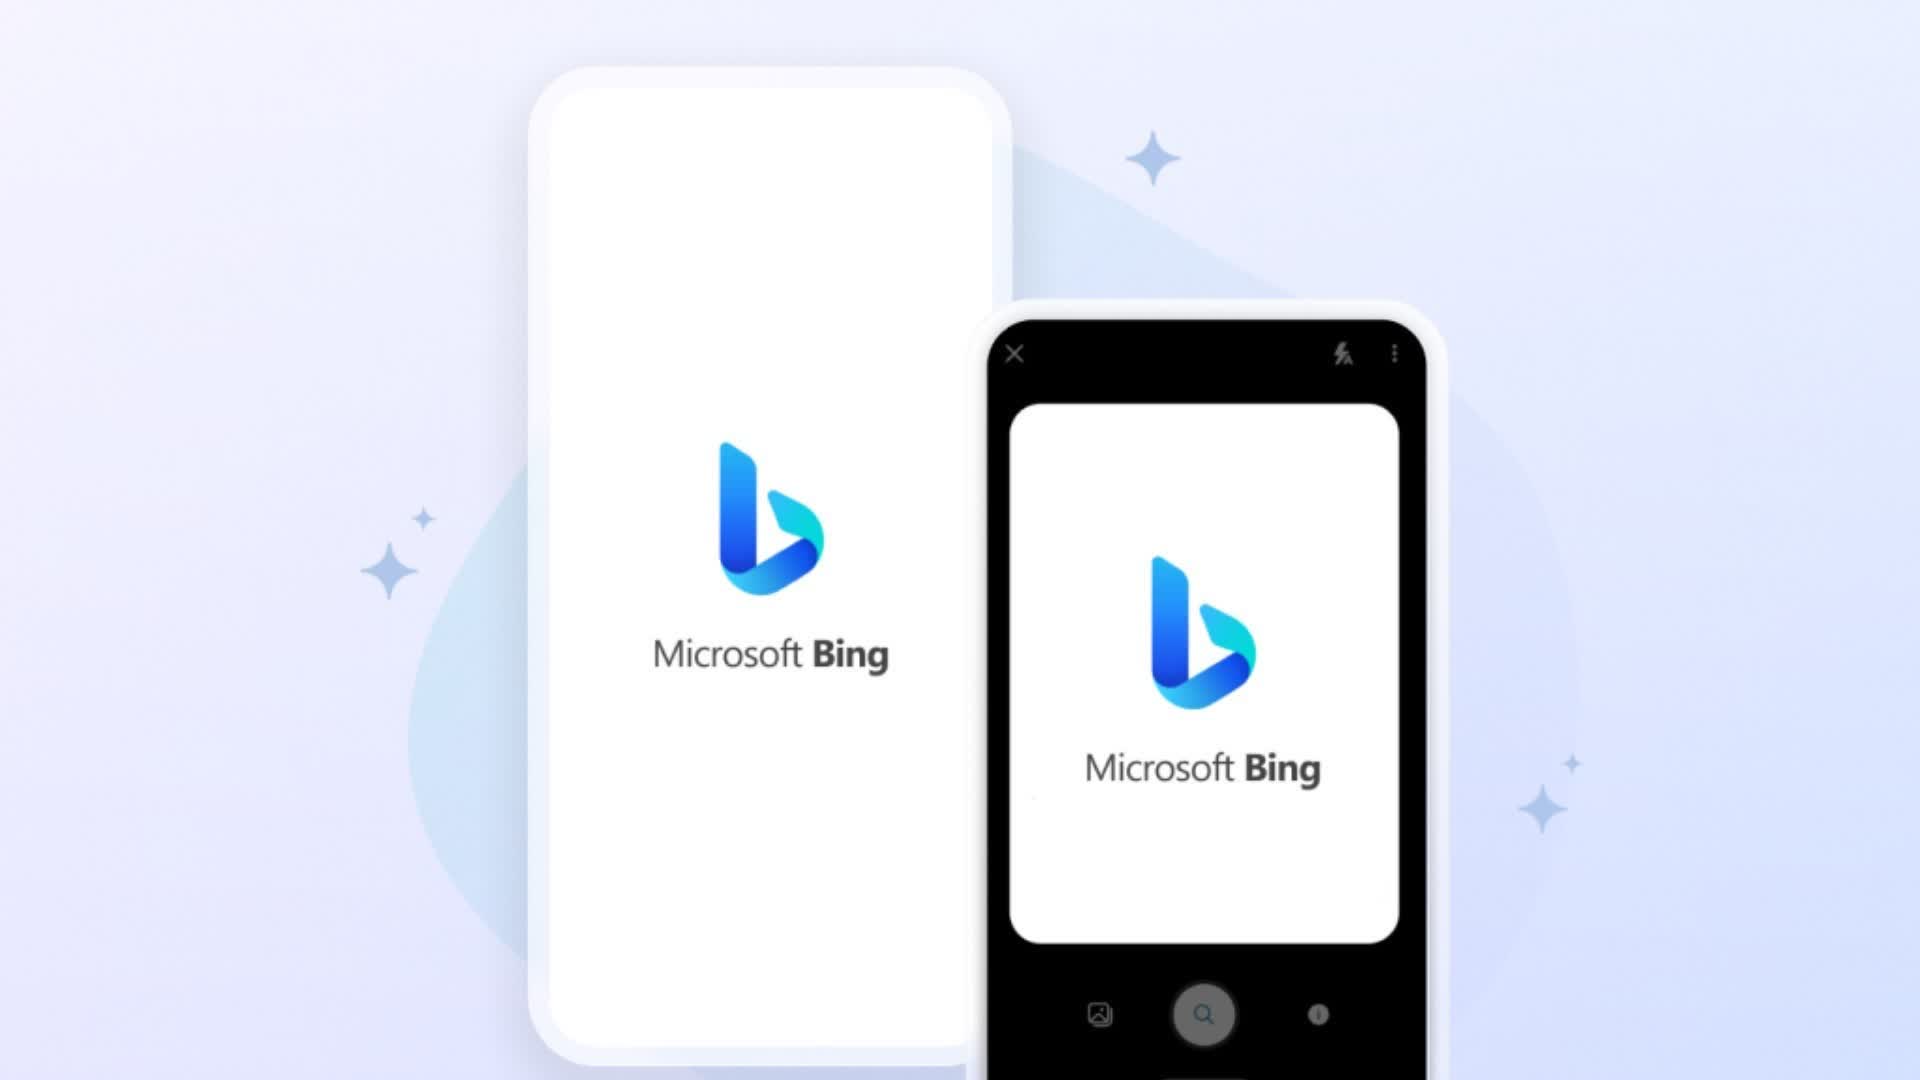 Microsoft opens free access to the Bing search engine